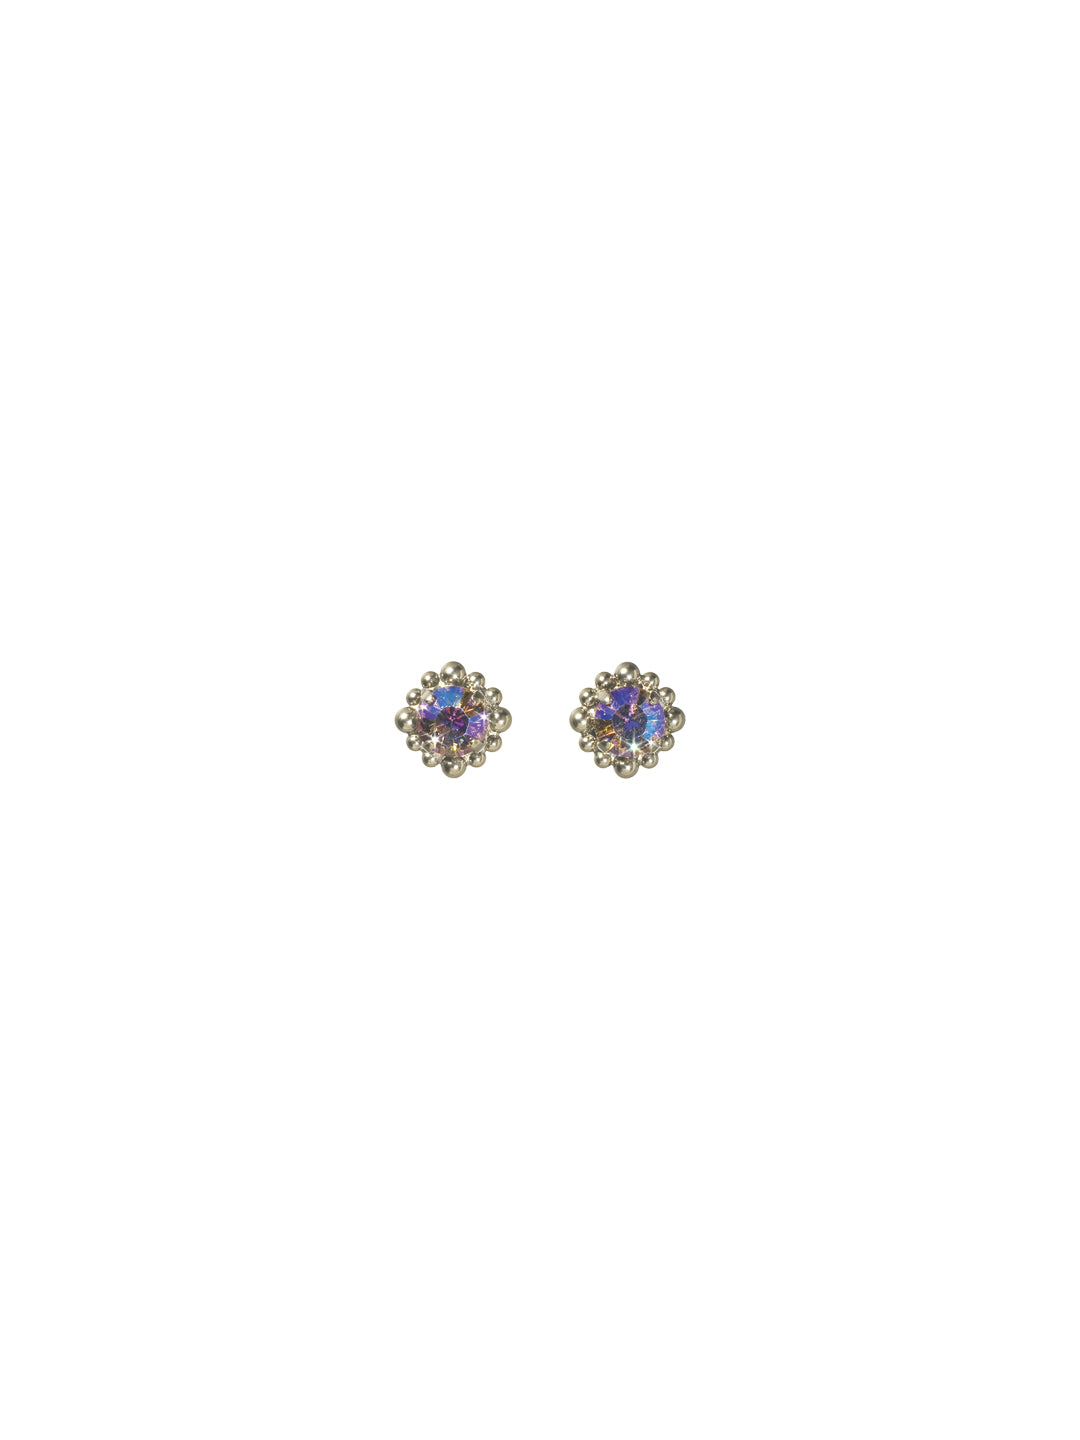 Bubbly Bauble Earrings - ECP3ASHY - Stay perfectly posted in these little treasures! A half-inch gem outlined with ball edging will make you feel forever elegant. From Sorrelli's Hydrangea collection in our Antique Silver-tone finish.